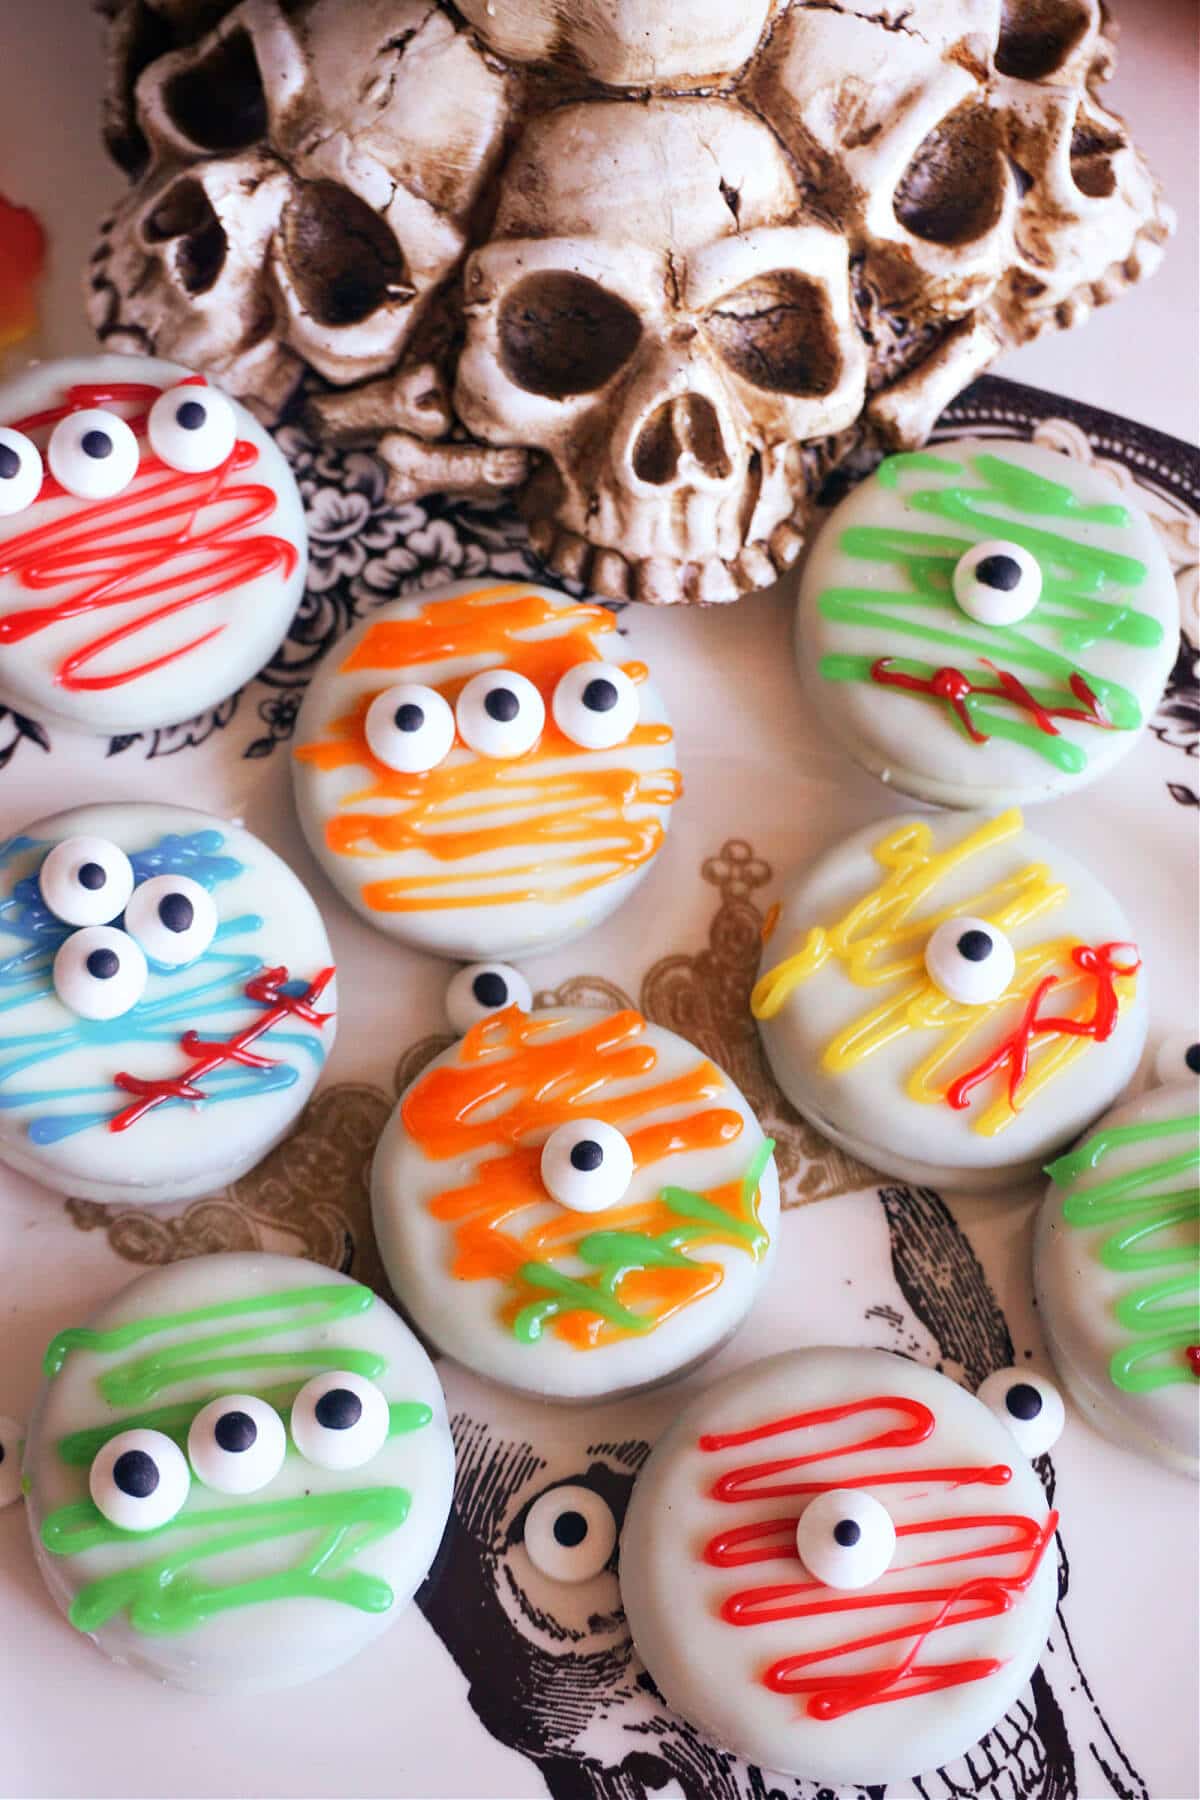 9 monster cookies with skull decorations at the top.